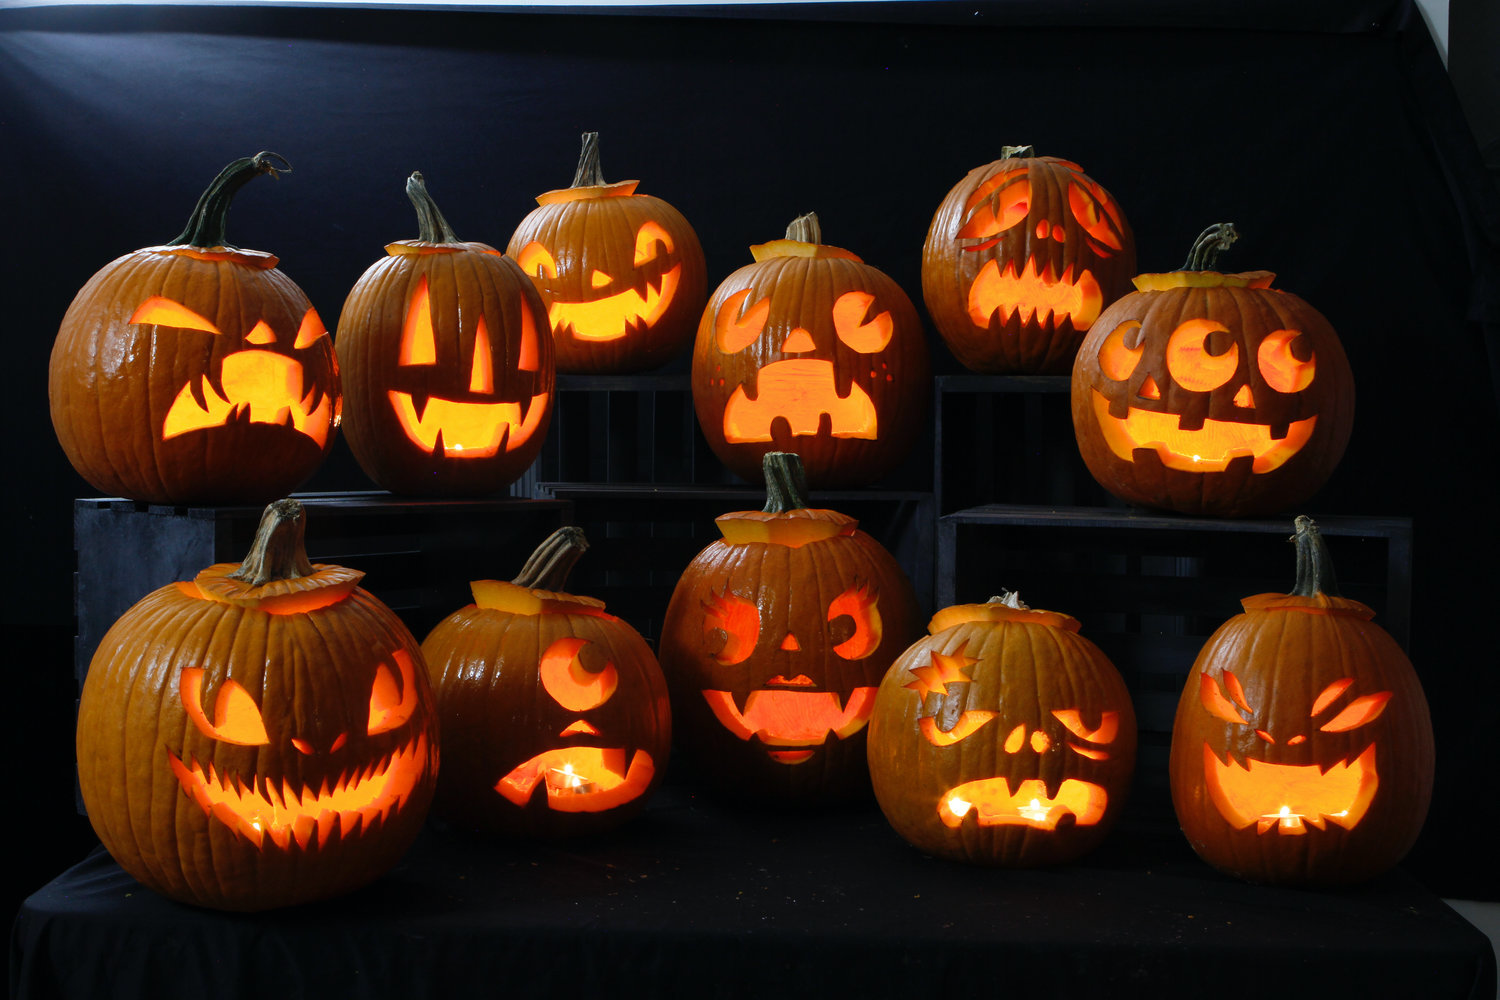 jack-o-lantern-carving-tips-for-students-the-guilfordian